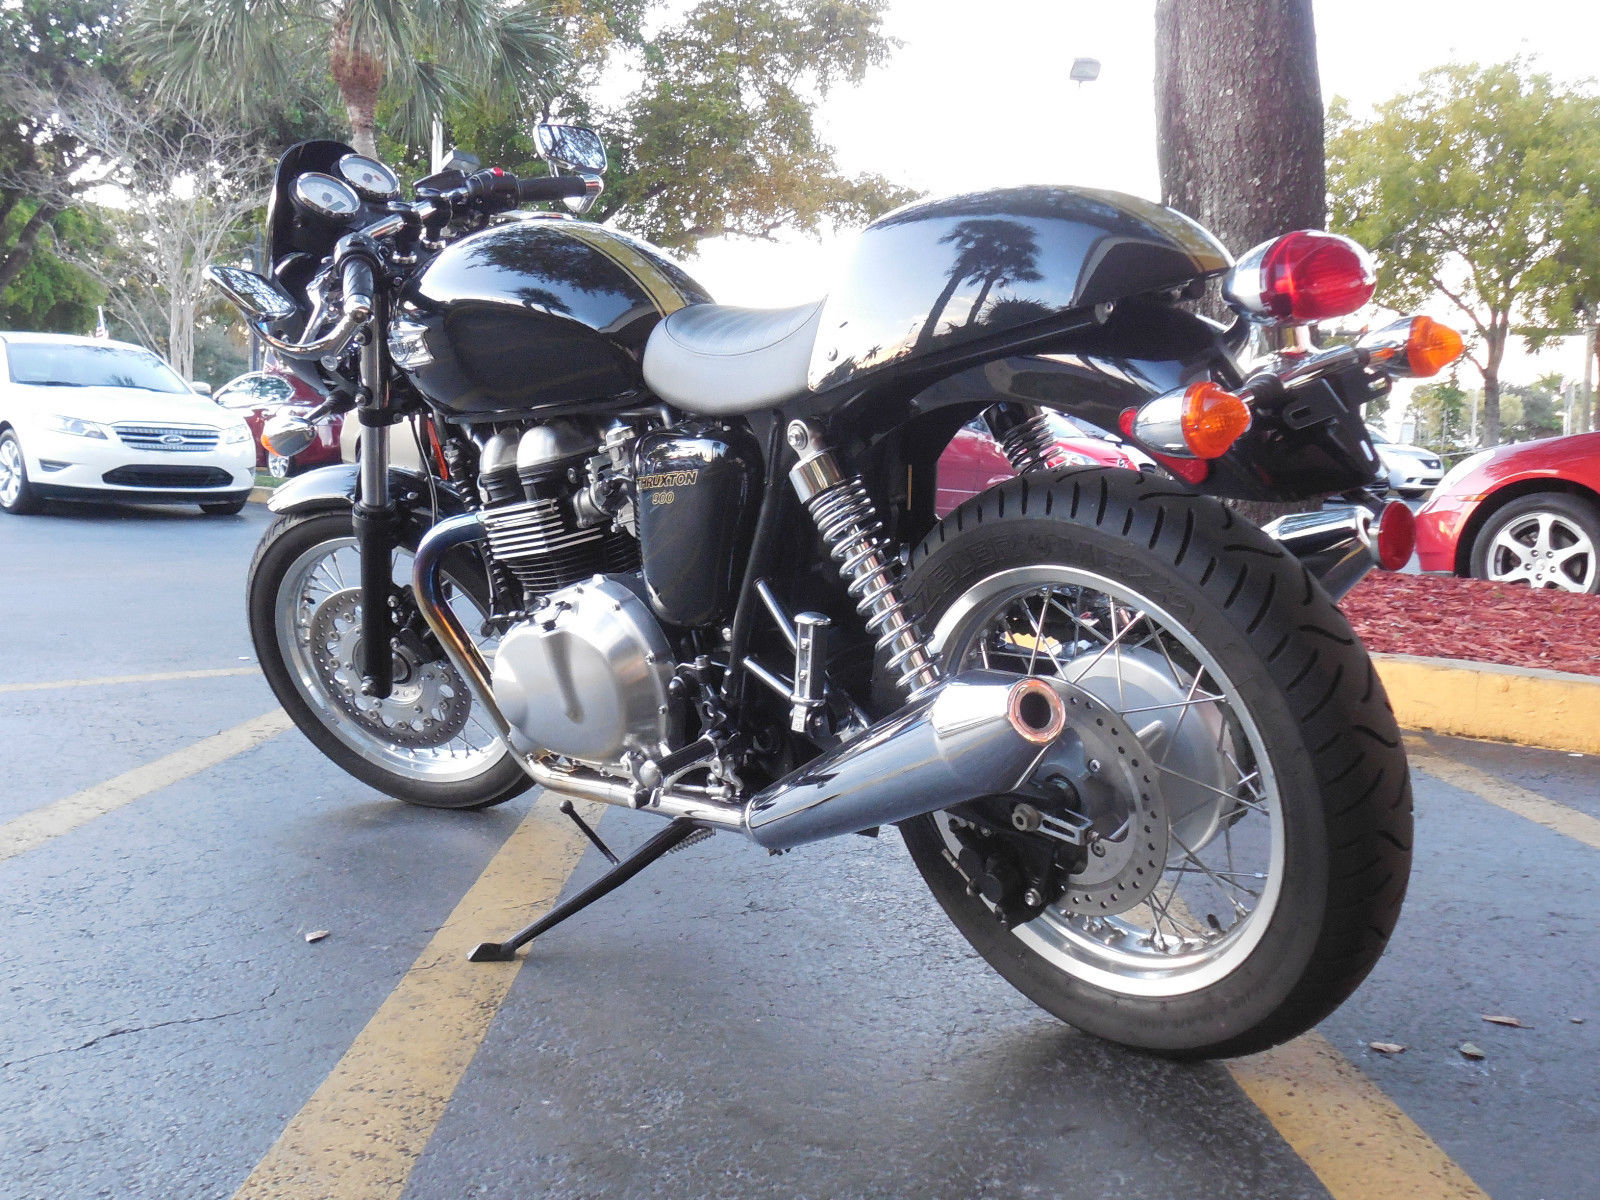 2014 TRIUMPH THRUXTON 900 ONLY 687 MILES.SHARP BLACK AND GOLD.PRICED TO SELL!!!